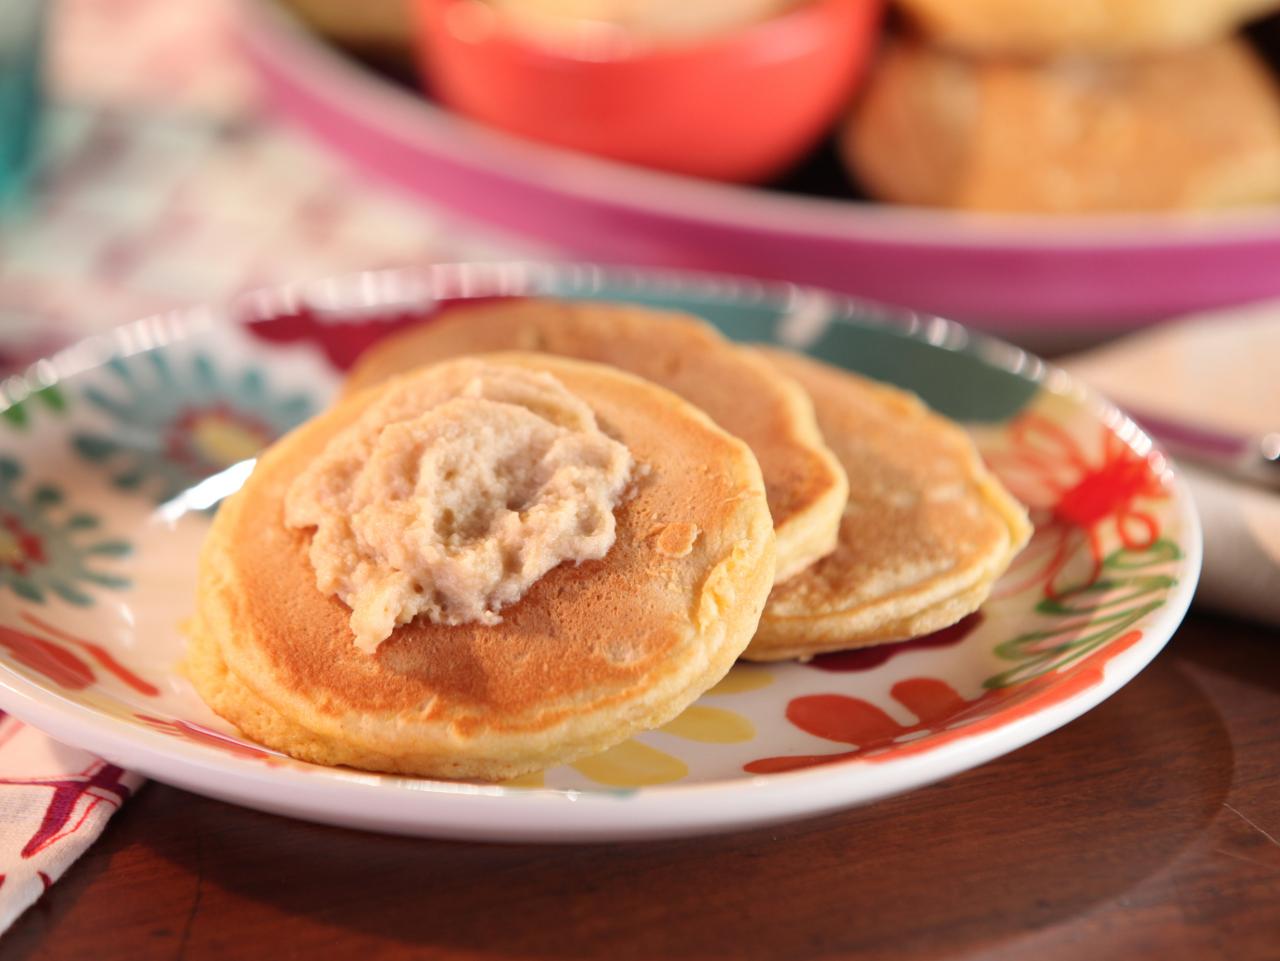 Savory Moments: Old-fashioned cornmeal griddle cakes